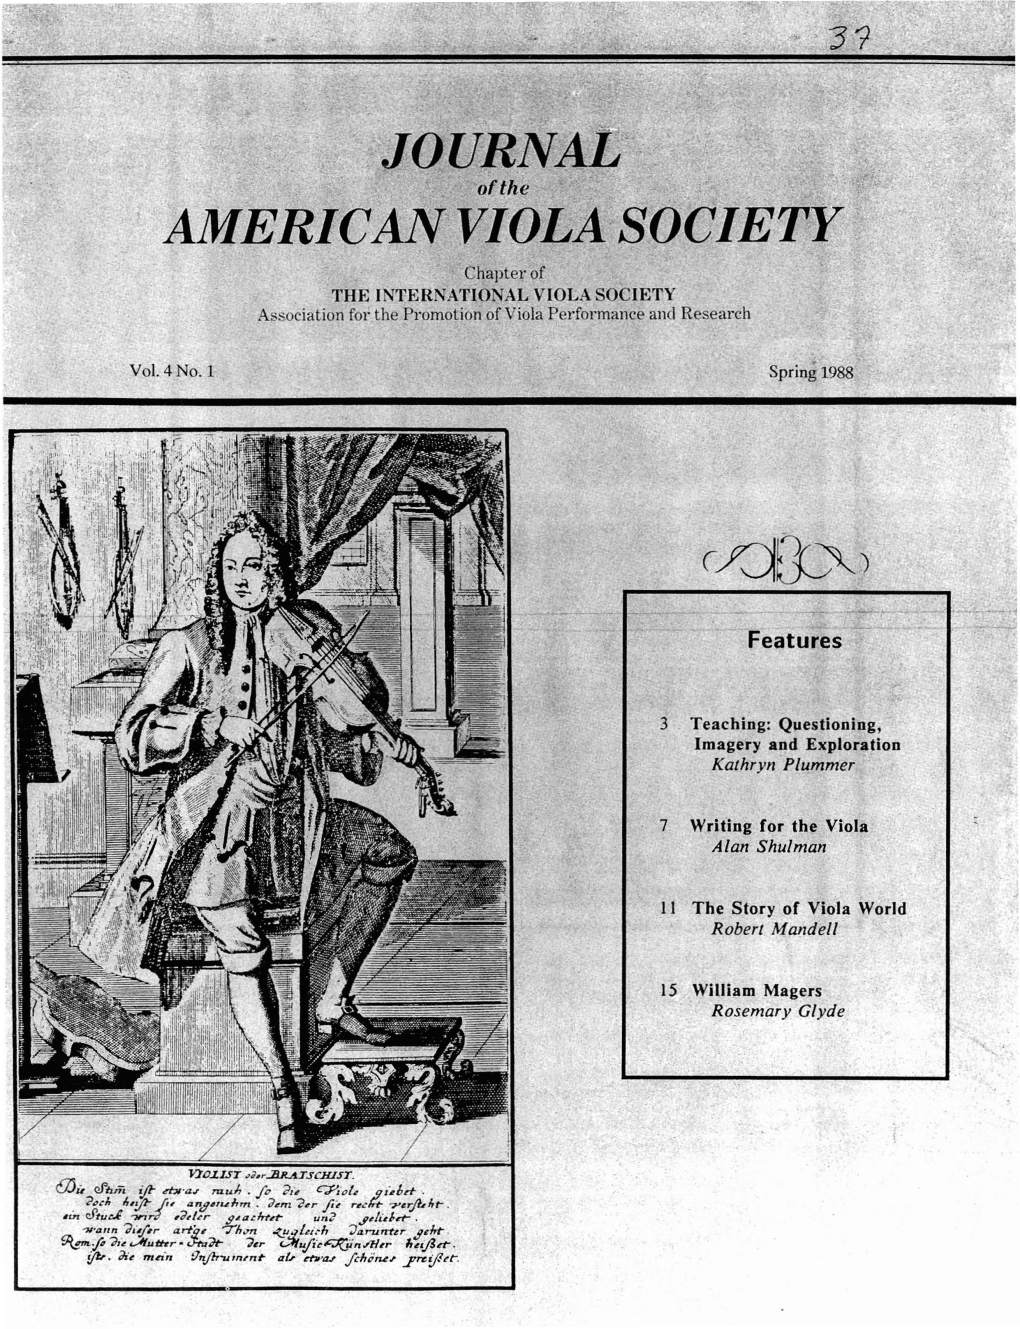 Journal of the American Viola Society Volume 4 No. 1, Spring 1988